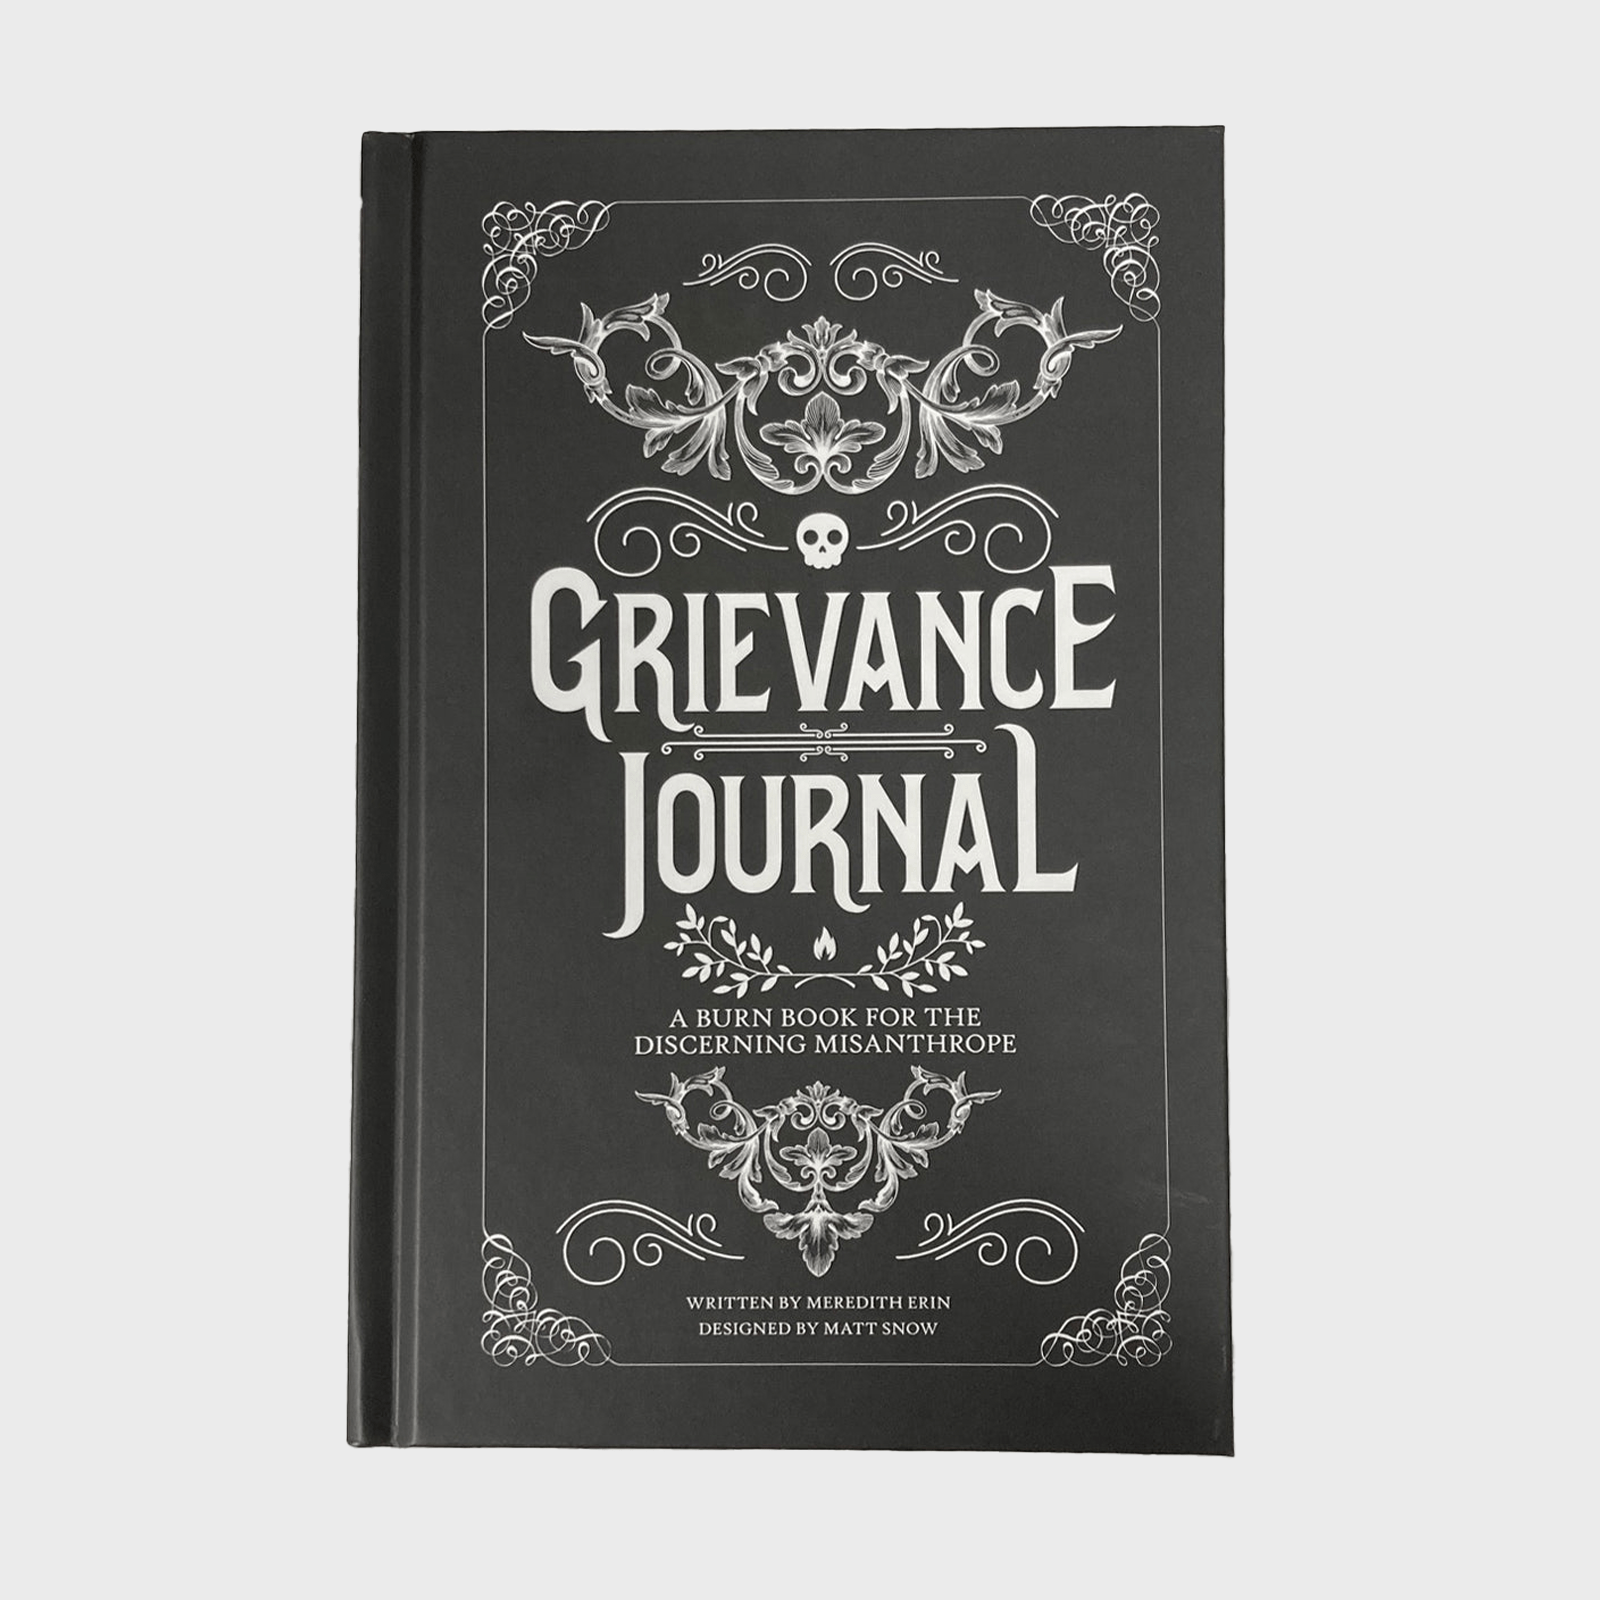 <p>Give her an outlet for all of her teen angst and daily gripes with this hilarious <a href="https://www.boredwalk.com/products/grievance-journal" rel="noopener noreferrer">grievance journal</a>. Rather than post her grievances on social media, this journal provides a safe place to vent her frustration. It has 52 writing prompts that ask things like, "What did you want to say to someone but couldn't?", and 52 funny de-motivational quotes, like "She is clothed in anxiety and loungewear," to help her learn to laugh at her own relentless angst.</p> <p class="listicle-page__cta-button-shop"><a class="shop-btn" href="https://www.boredwalk.com/products/grievance-journal">Shop Now</a></p>